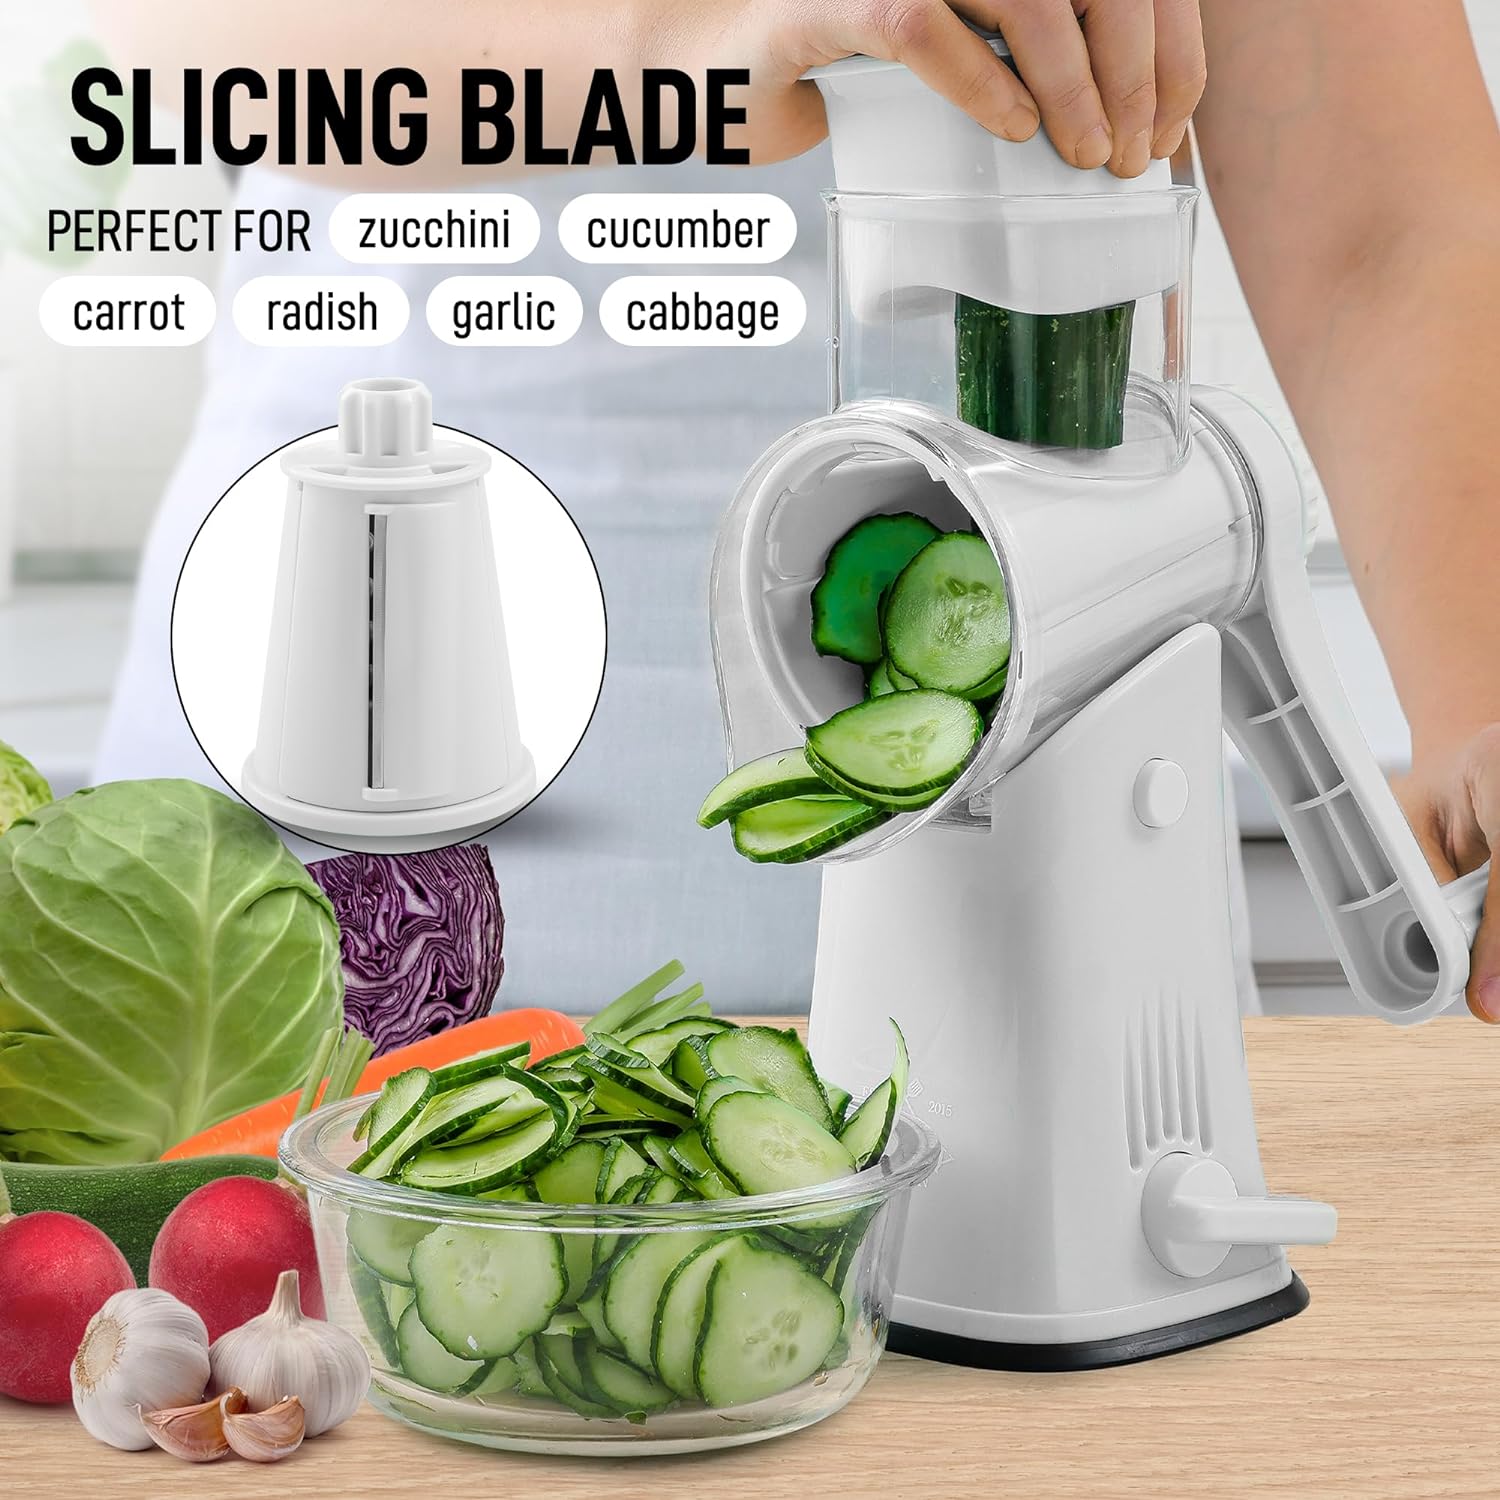 3In1 Rotary Cheese Grater Cheese Shredder Hand Crank Food Processor Kitchen  Slicer Tool Vegetable Grater Stainless Steel Blades